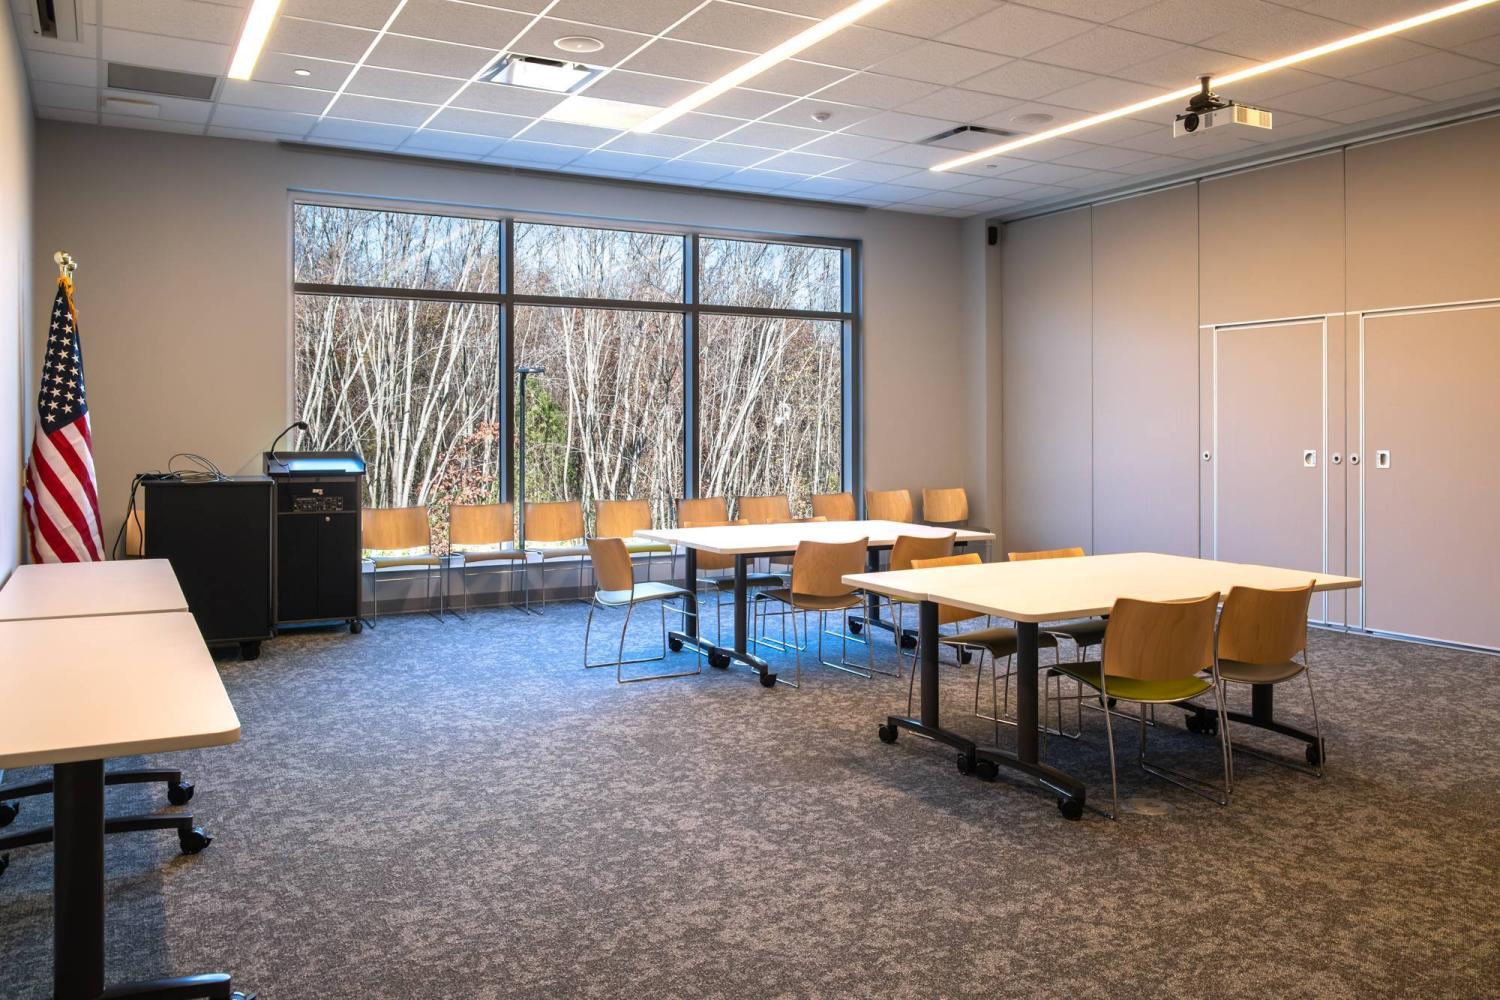 Southwest Meeting Room A